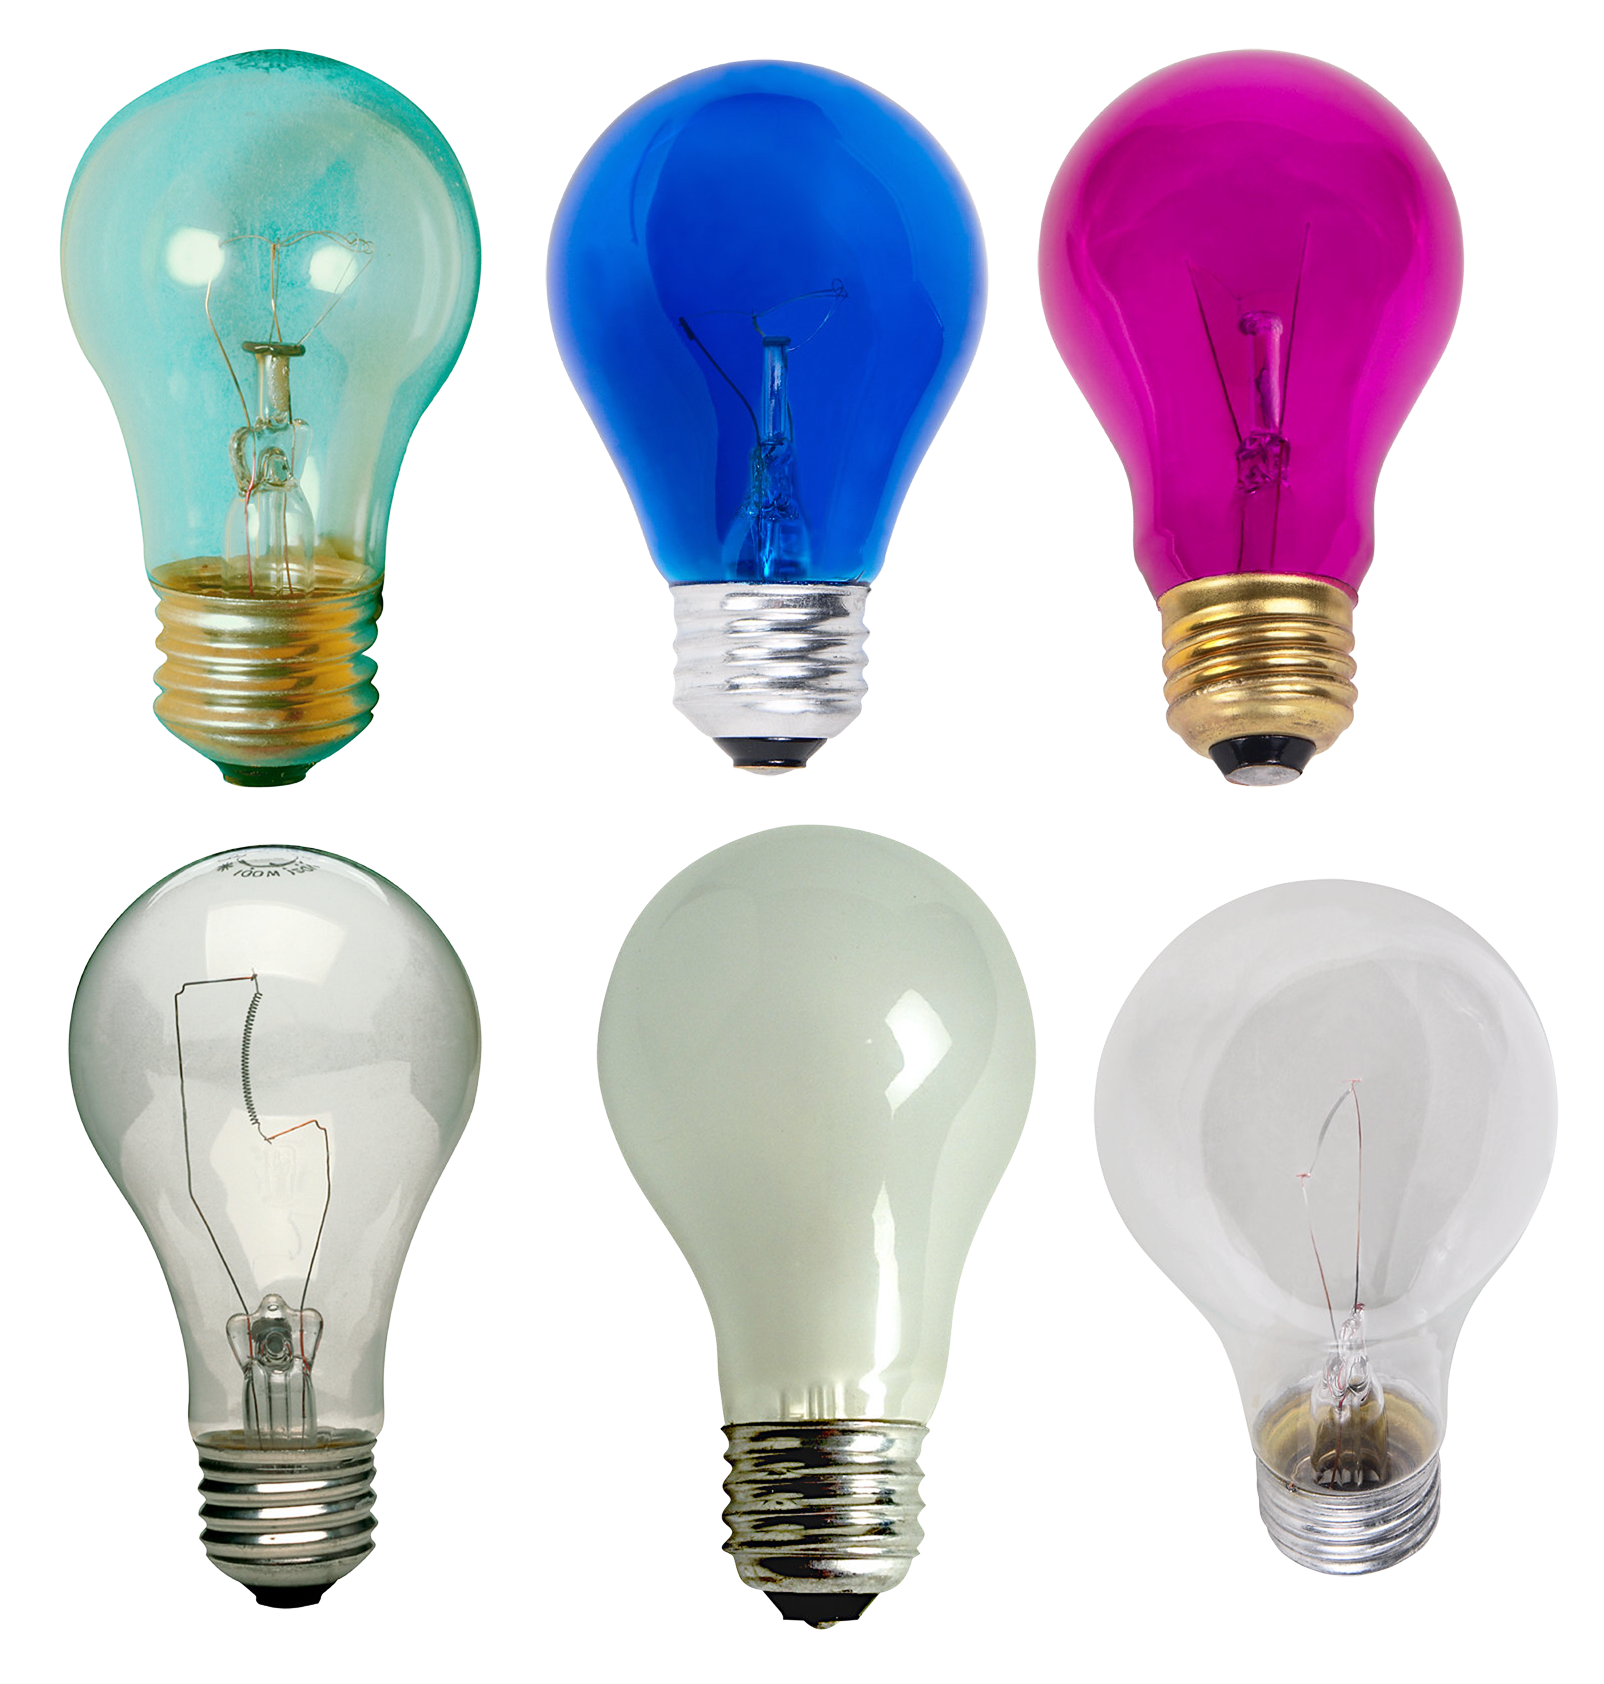 Download Lamp S Png Image For Free